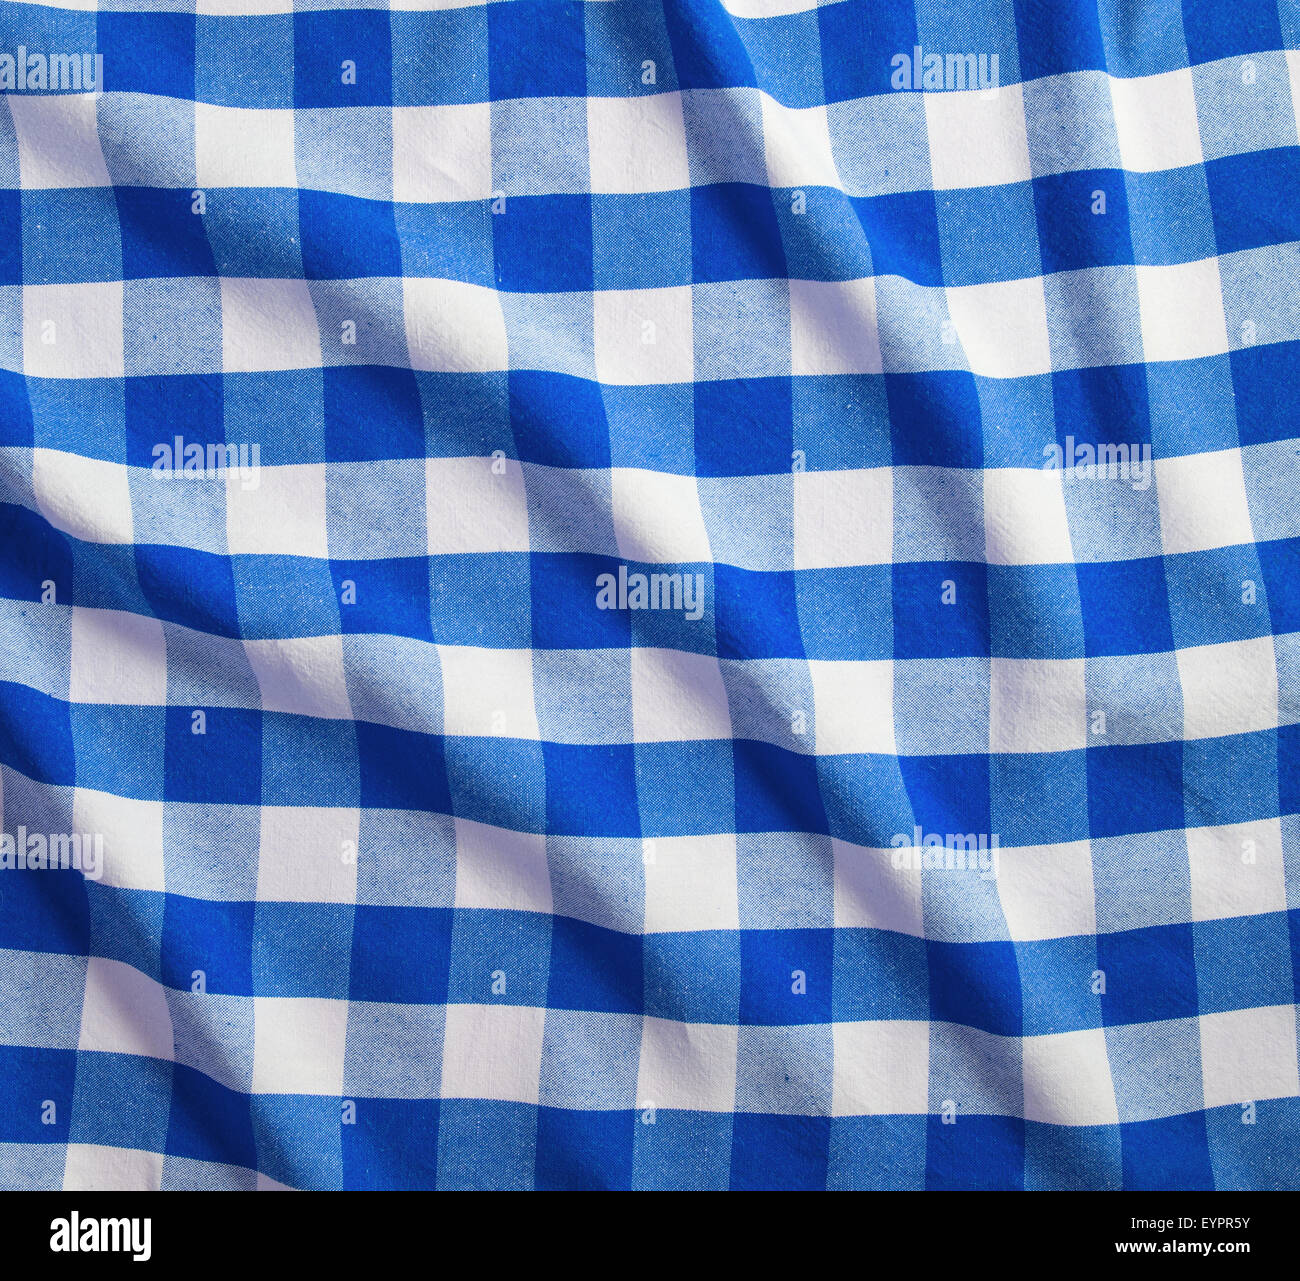 blue and white linen tablecloth Stock Photo